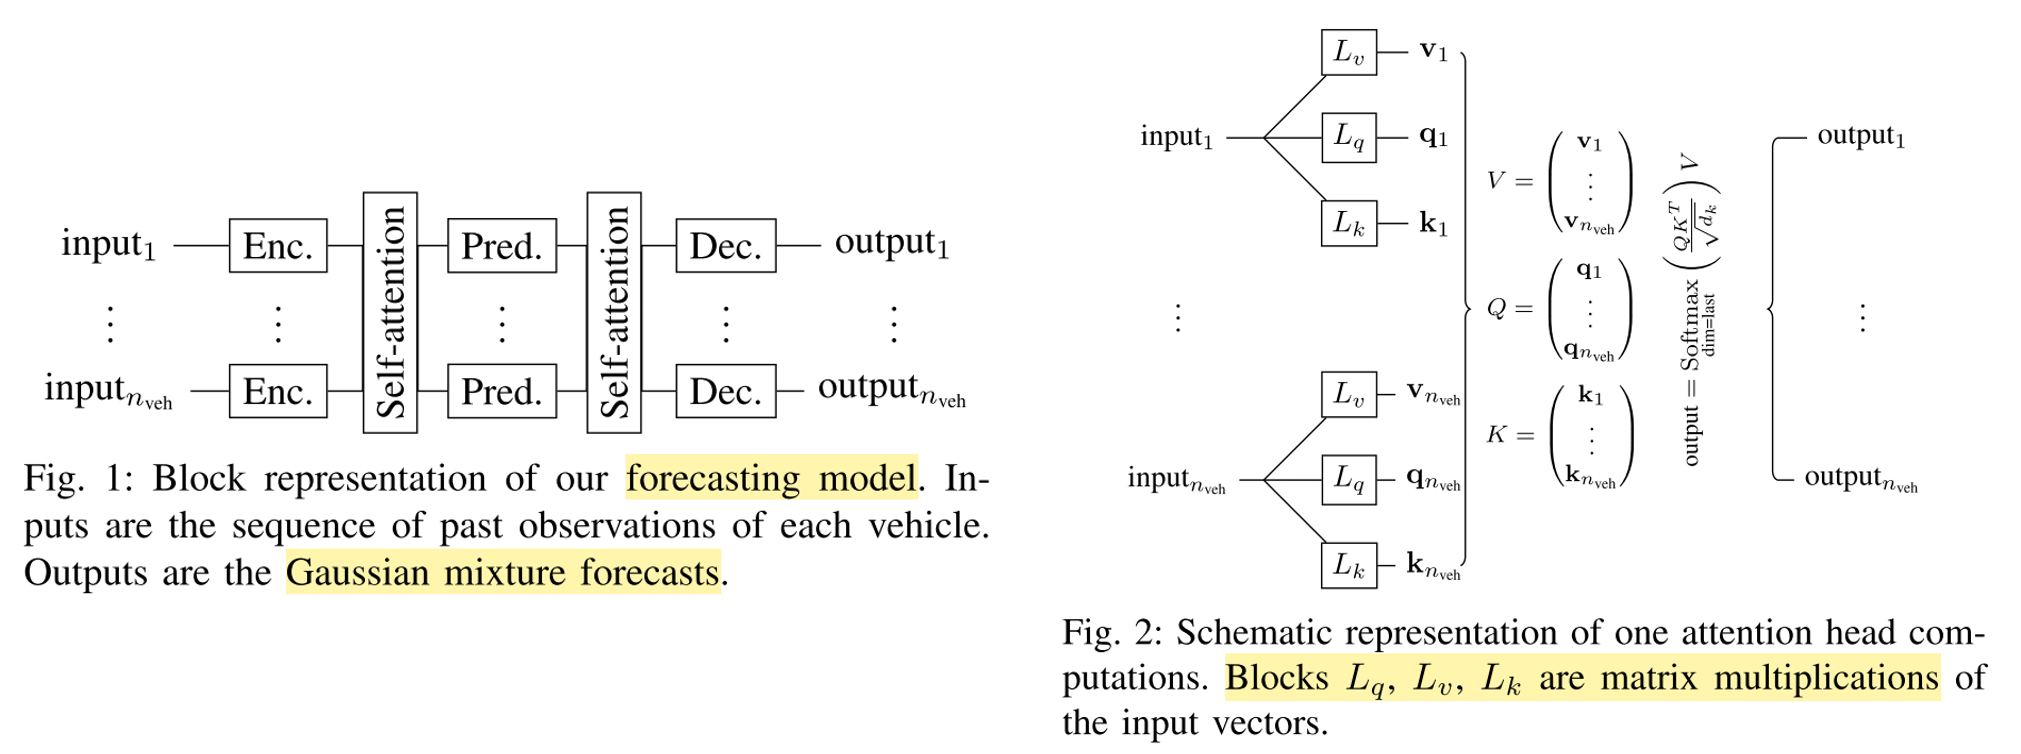 Two multi-head attention layers are used to account for social interactions between all vehicles. They are combined with LSTM layers to offer joint, long-range and multi-modal forecasts. Source.